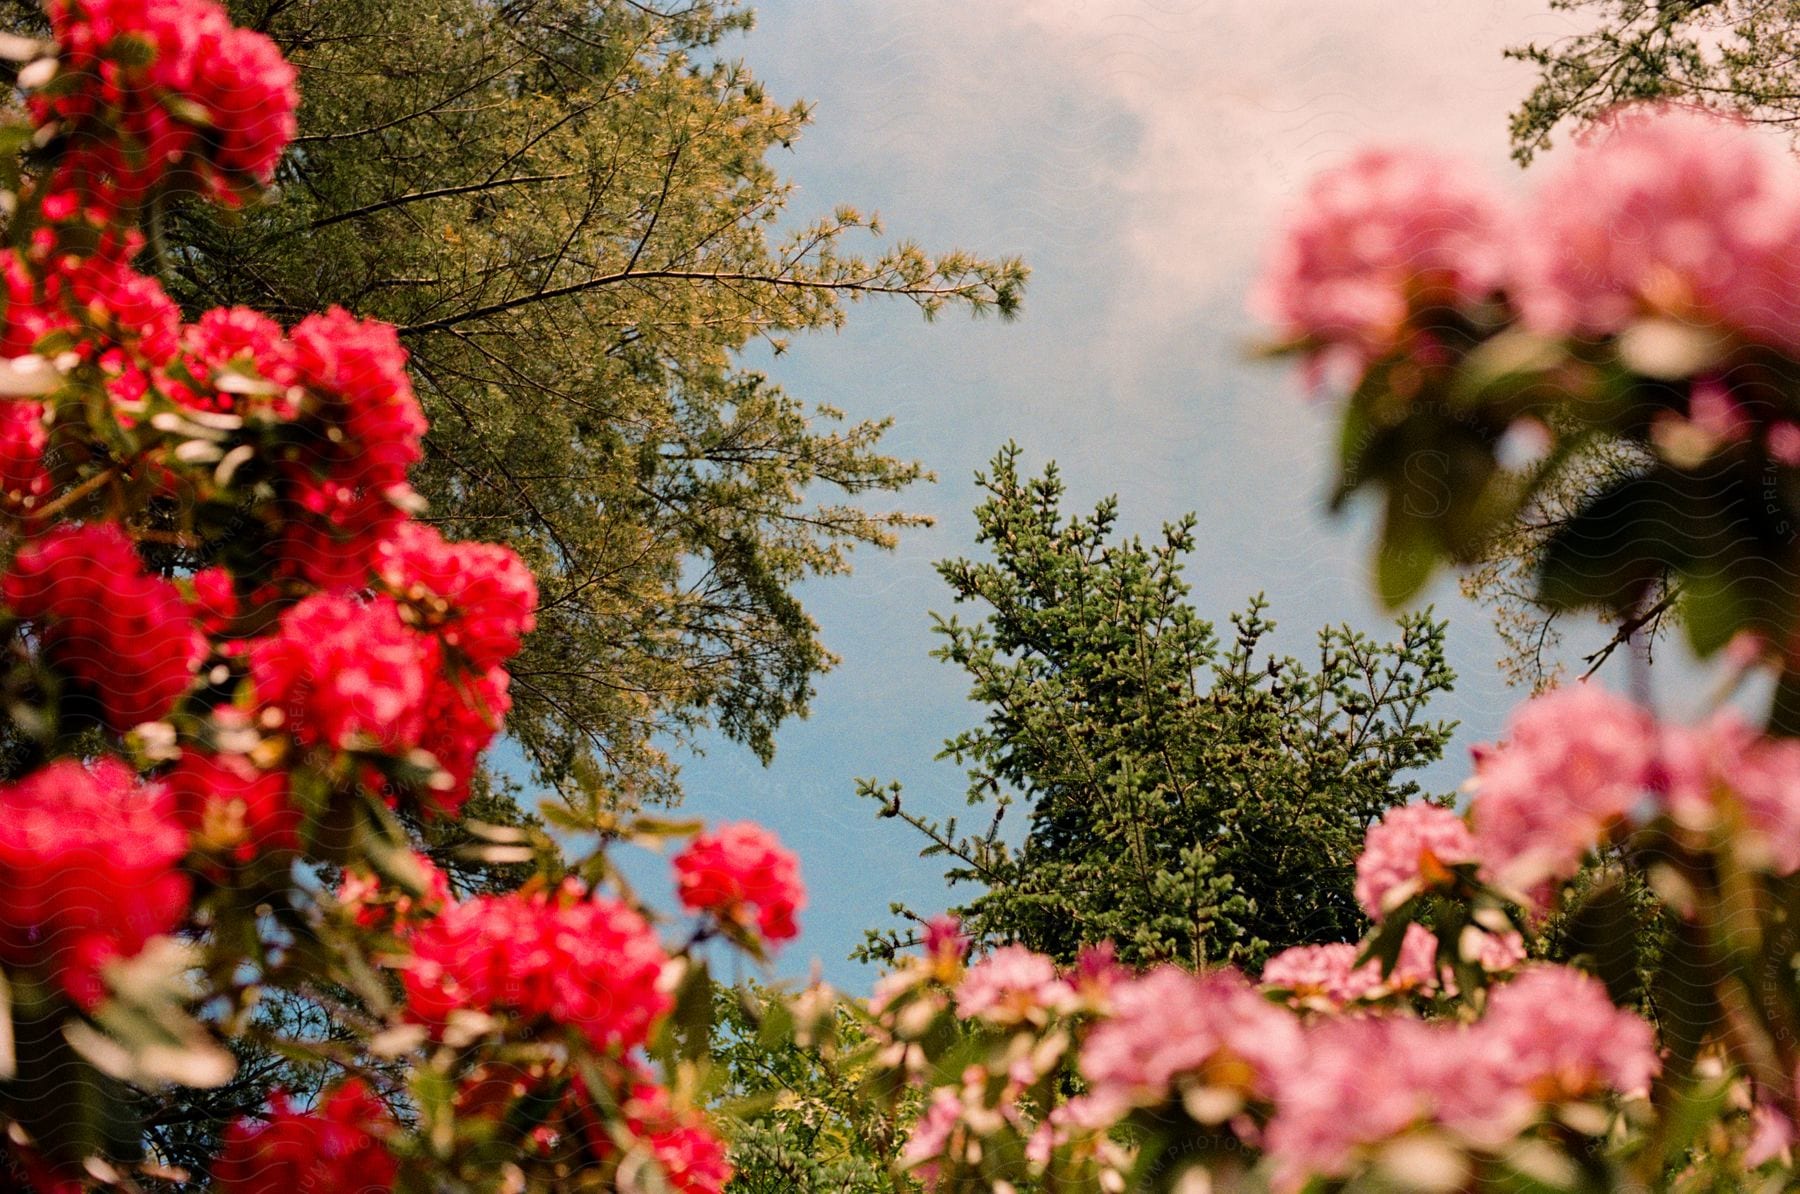 Red and pink flowers stand against the green trees and the sky